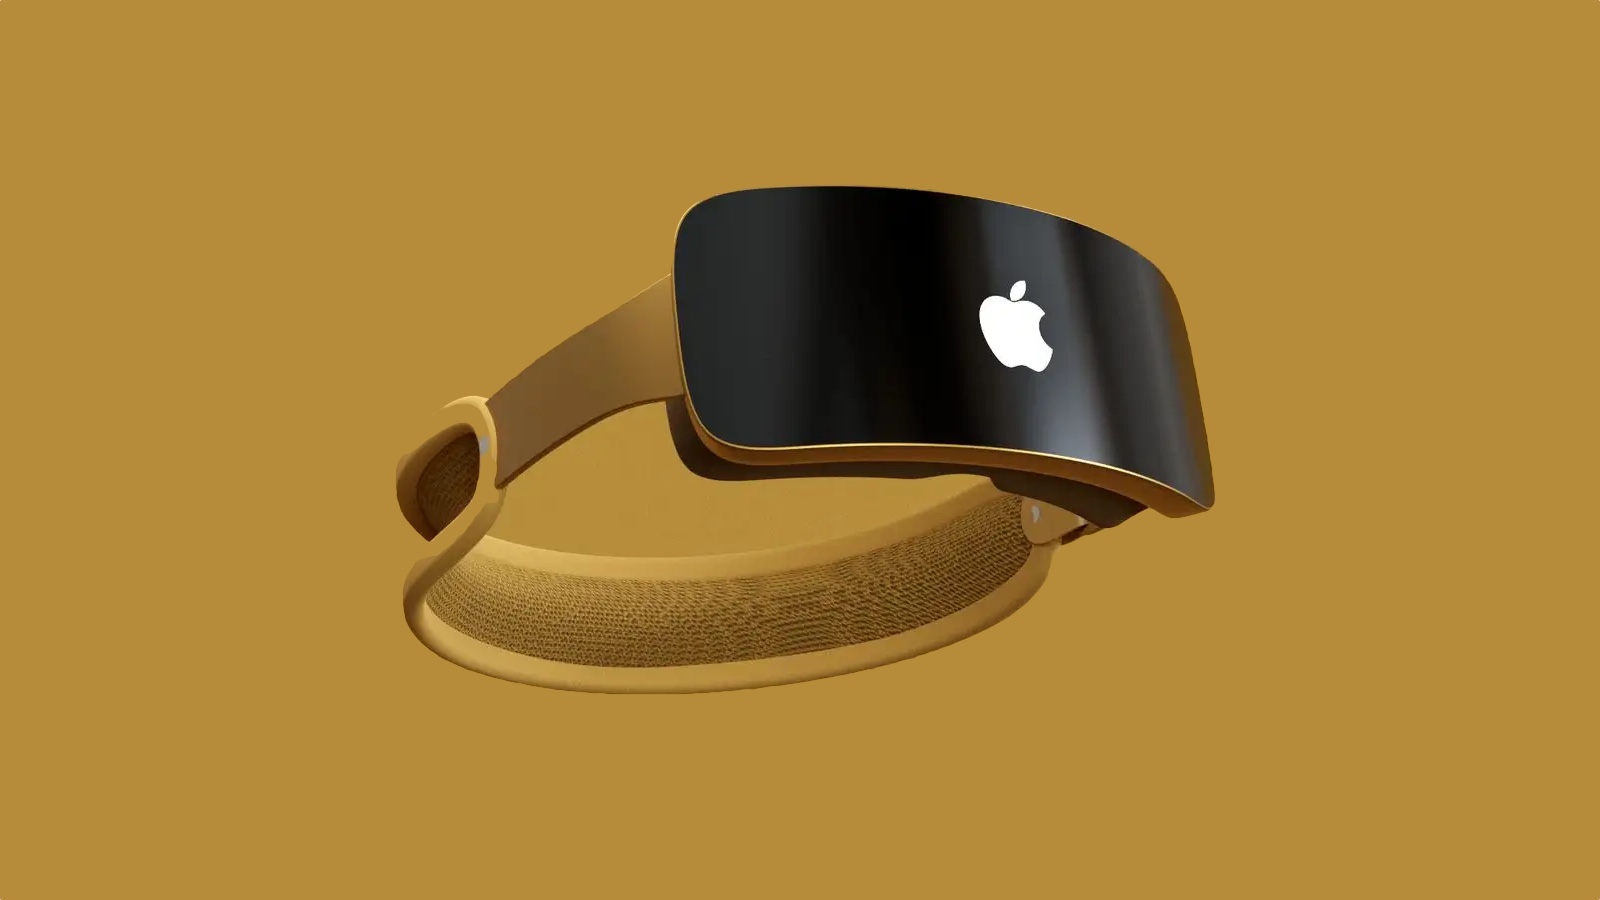 Apple's Reality Pro VR headset might not cost the eye-watering sum we thought